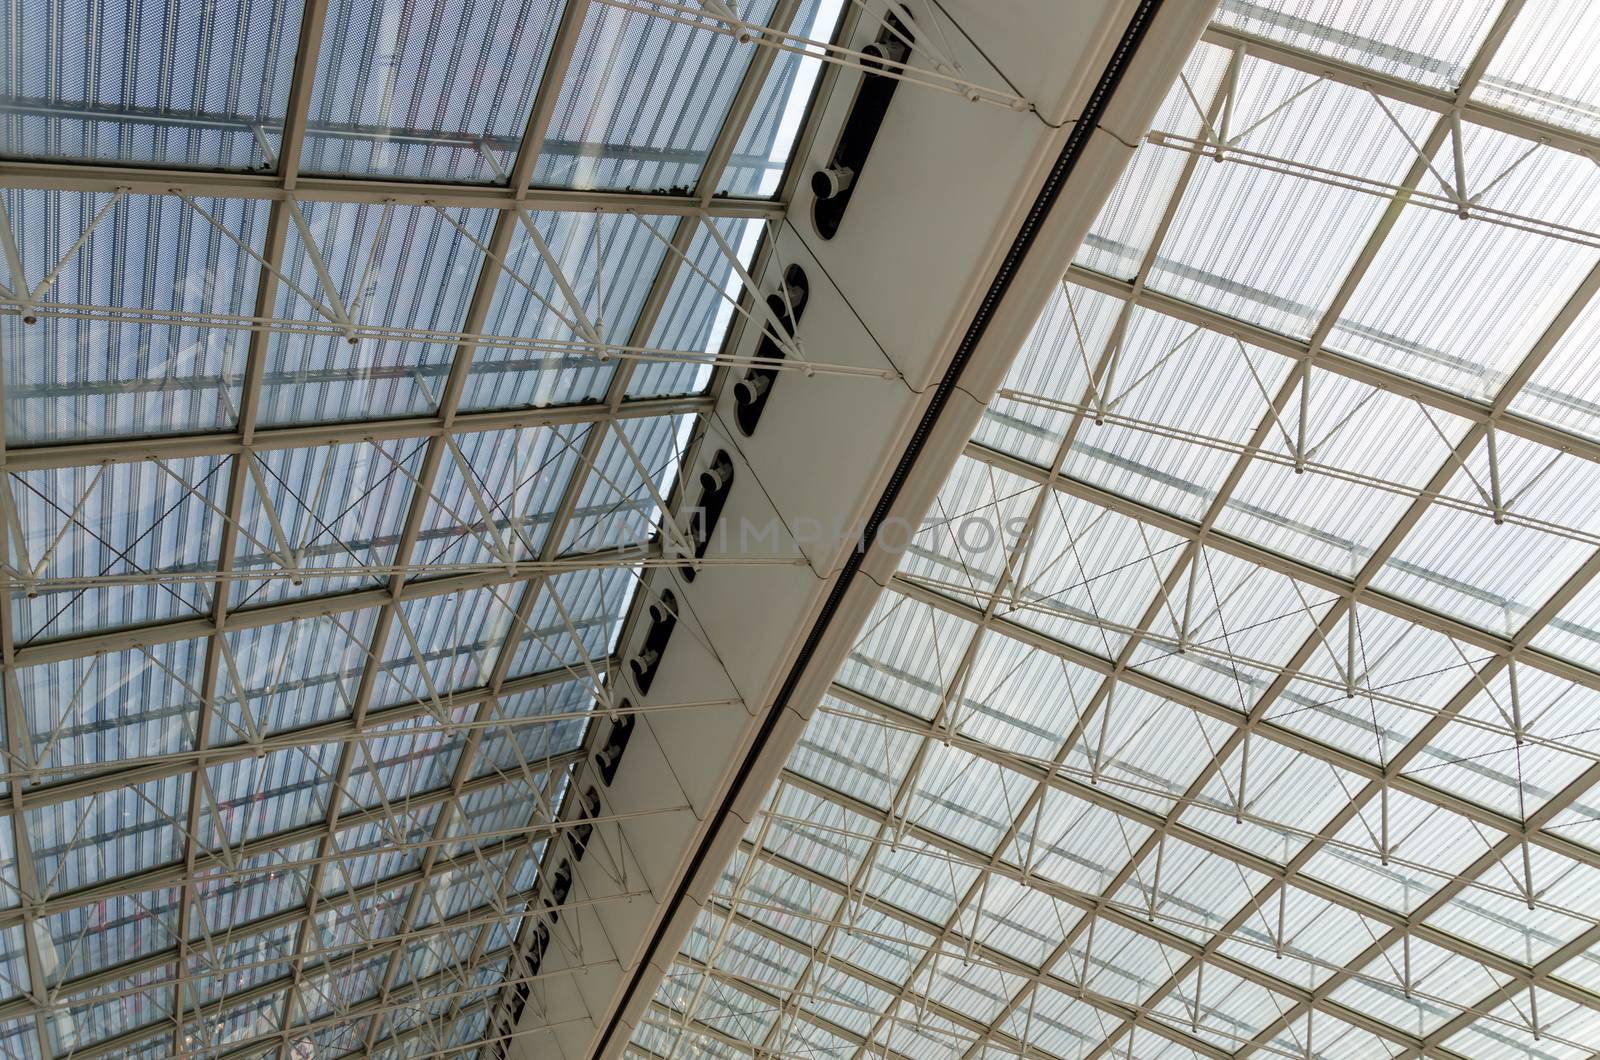 Roof Structure Detail of Charles de Gaulle airport in Paris by siraanamwong